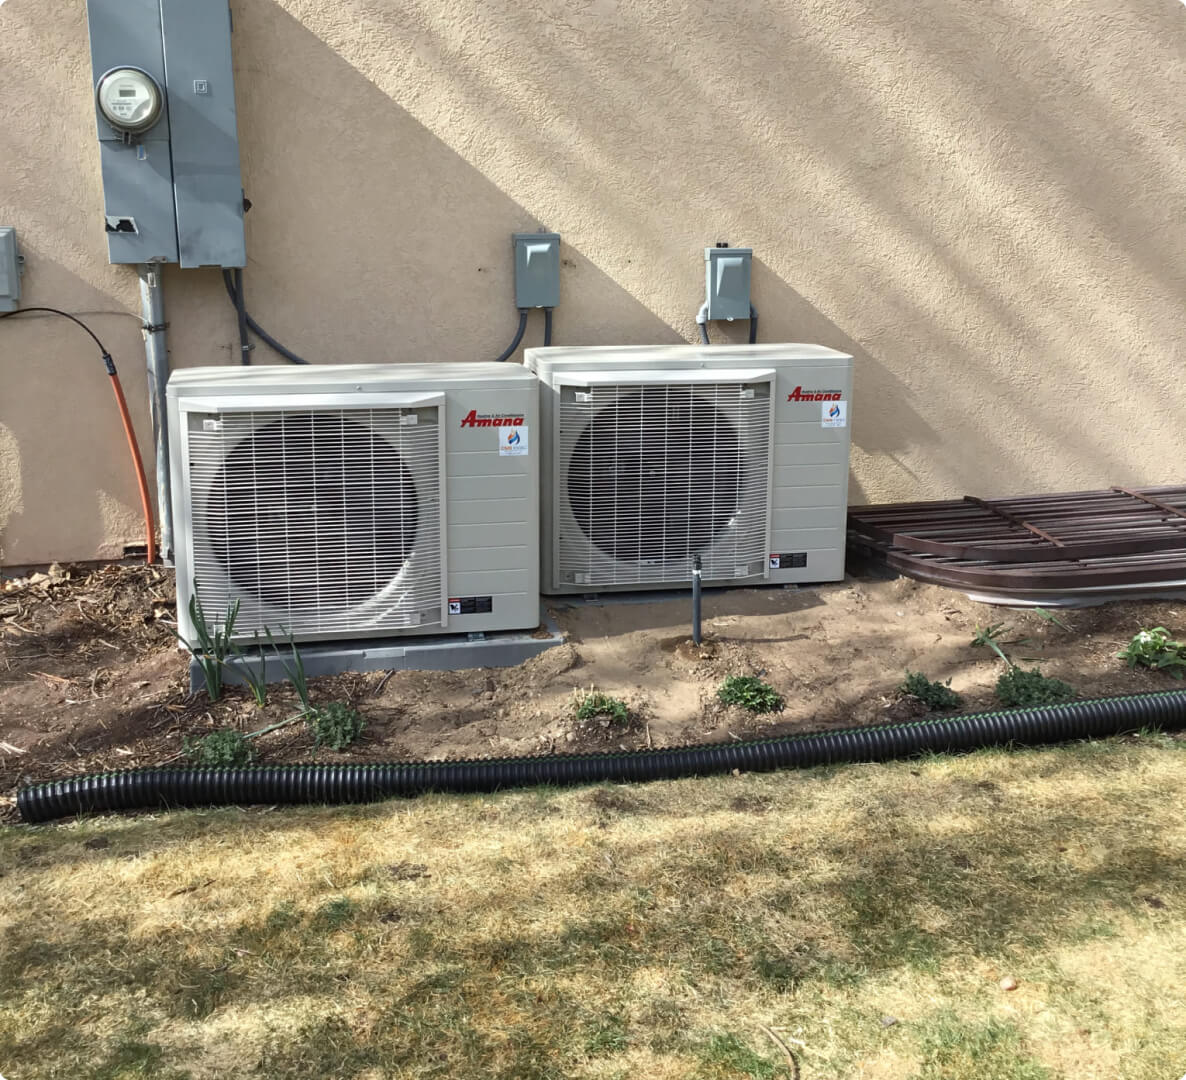 Two Amana air conditioning units outside a residential home.